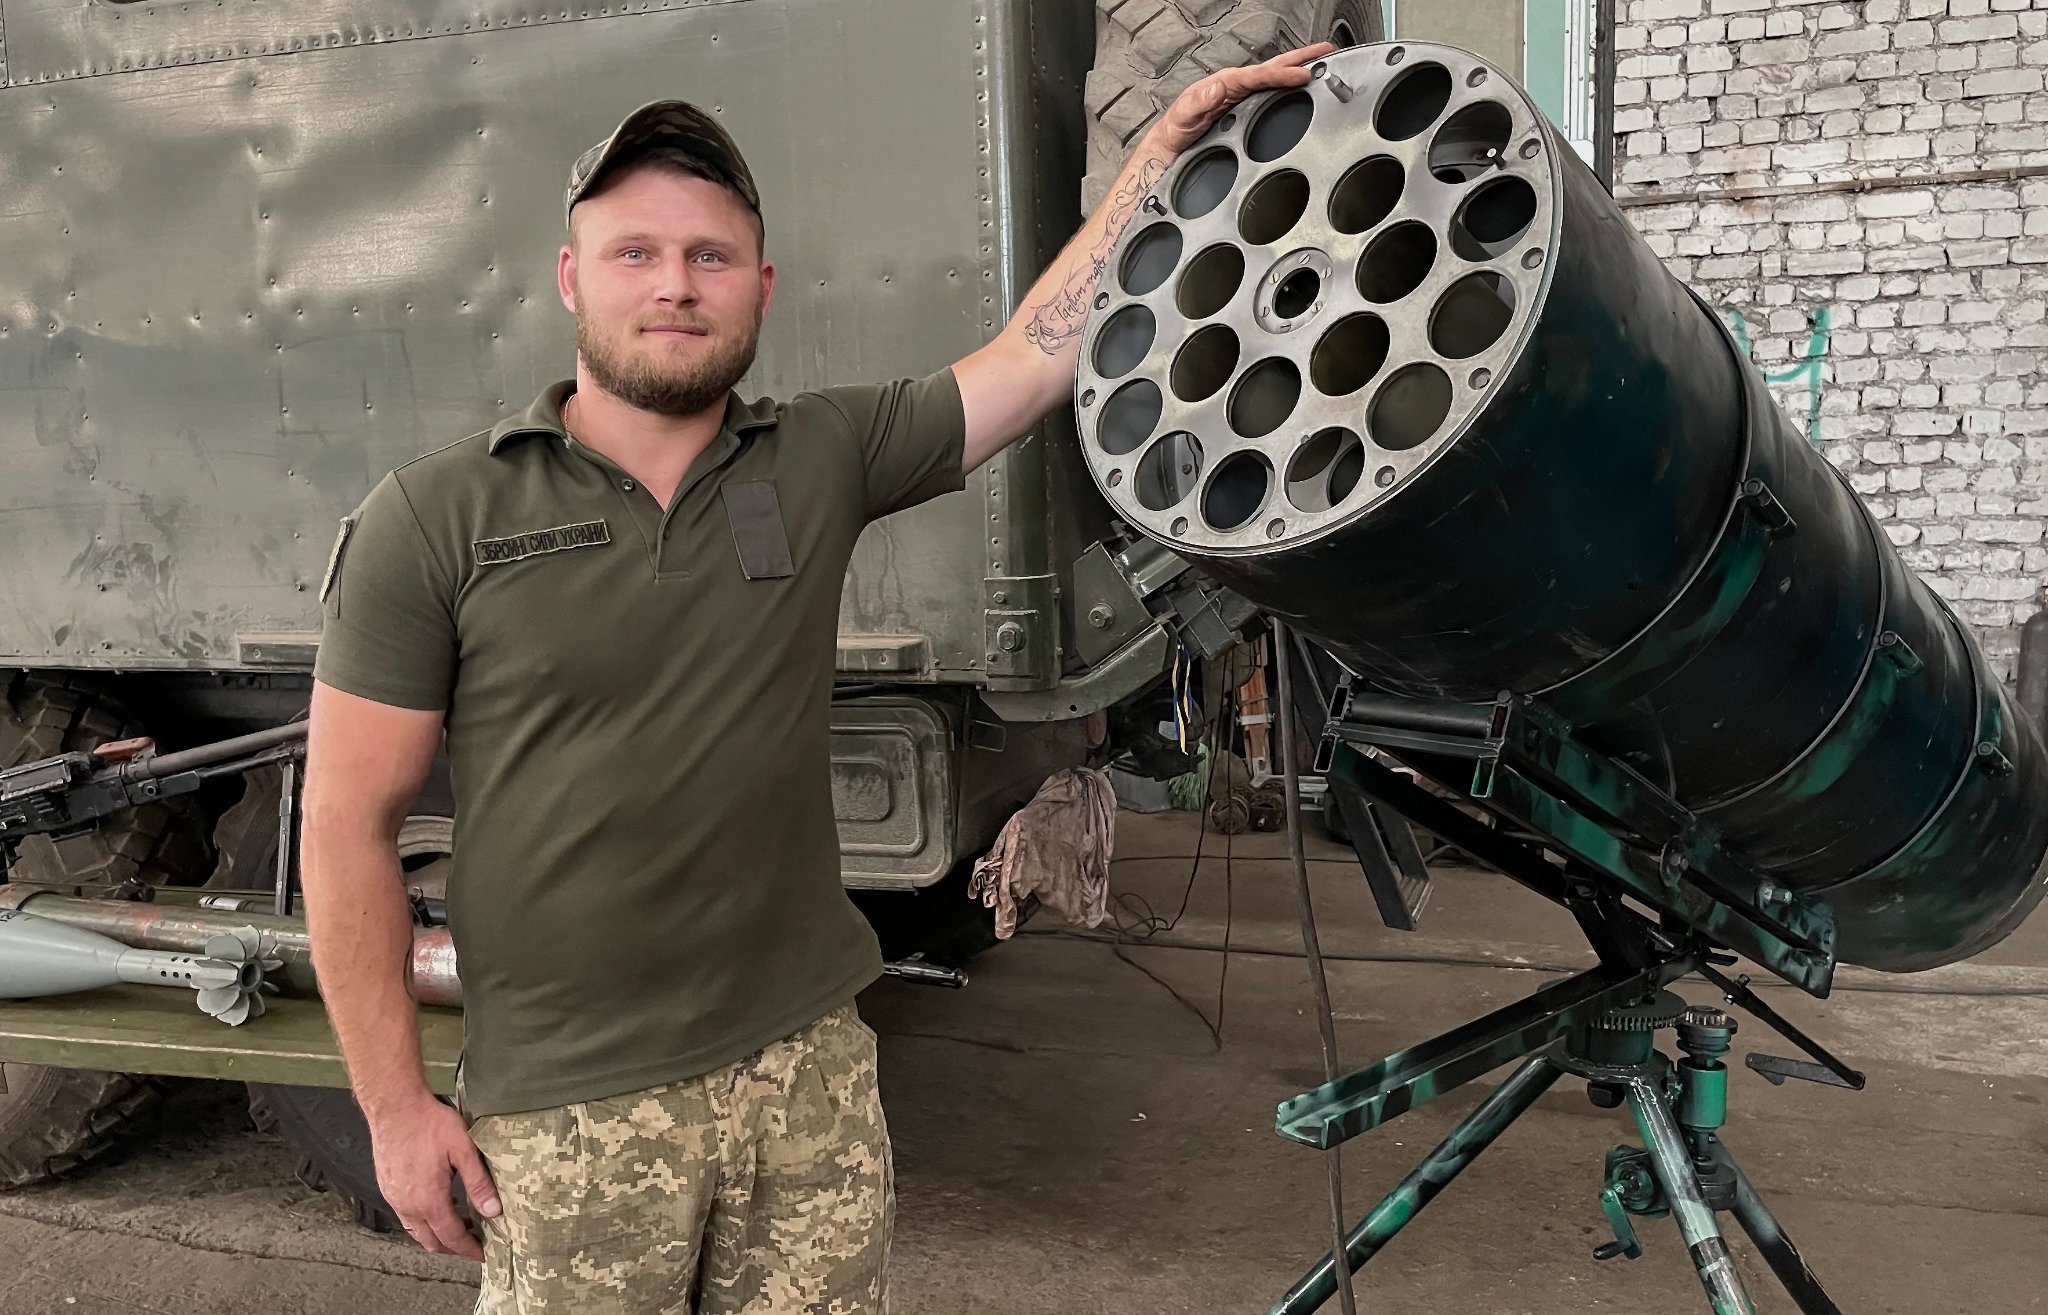 The Ukrainian Armed Forces transformed a helicopter launcher with C-8 missiles into a multiple rocket launcher system